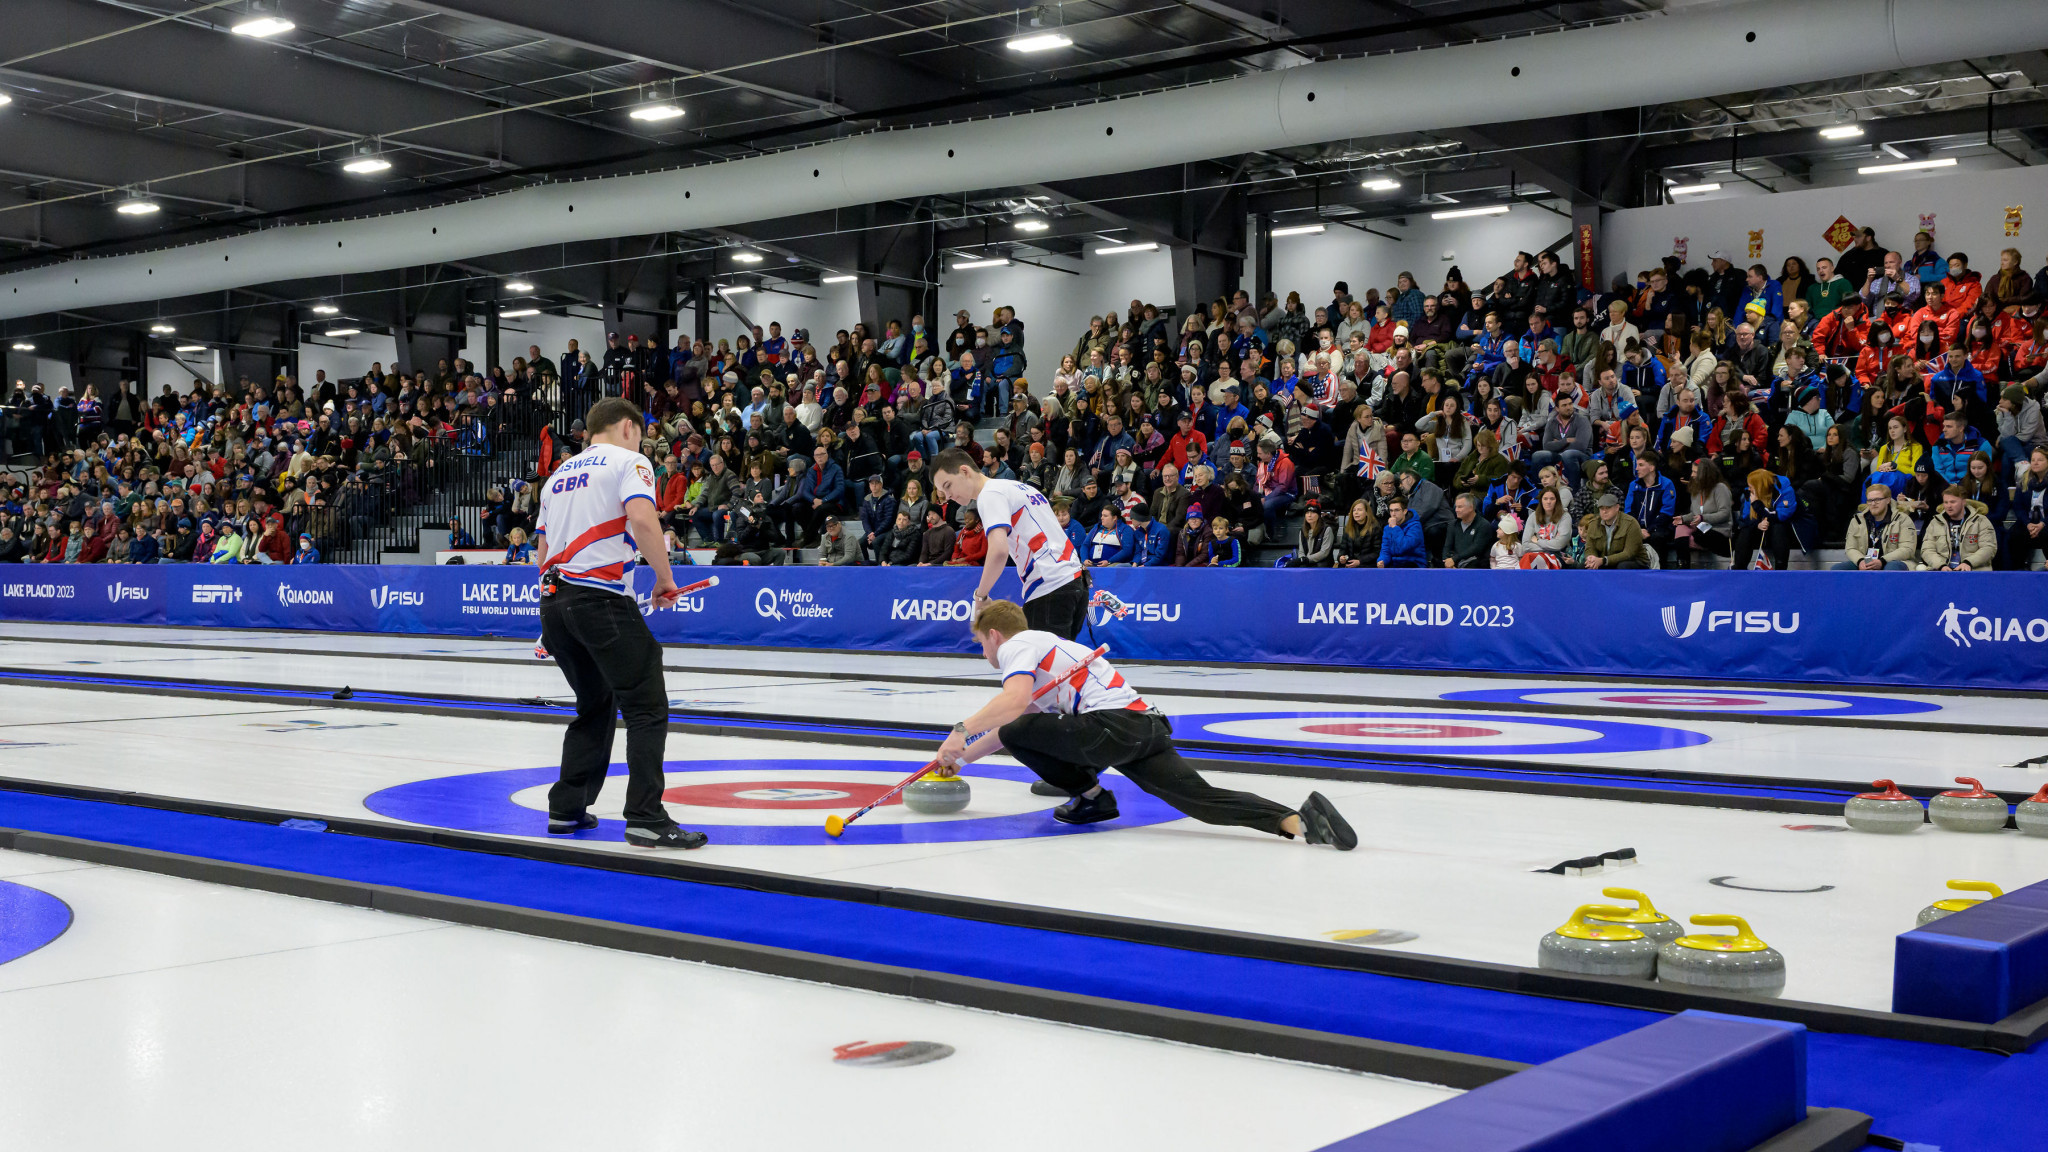 The Saranac Lake Civic Center is claimed to have provided several sell-outs as it hosted curling competitions at Lake Placid 2023 ©FISU